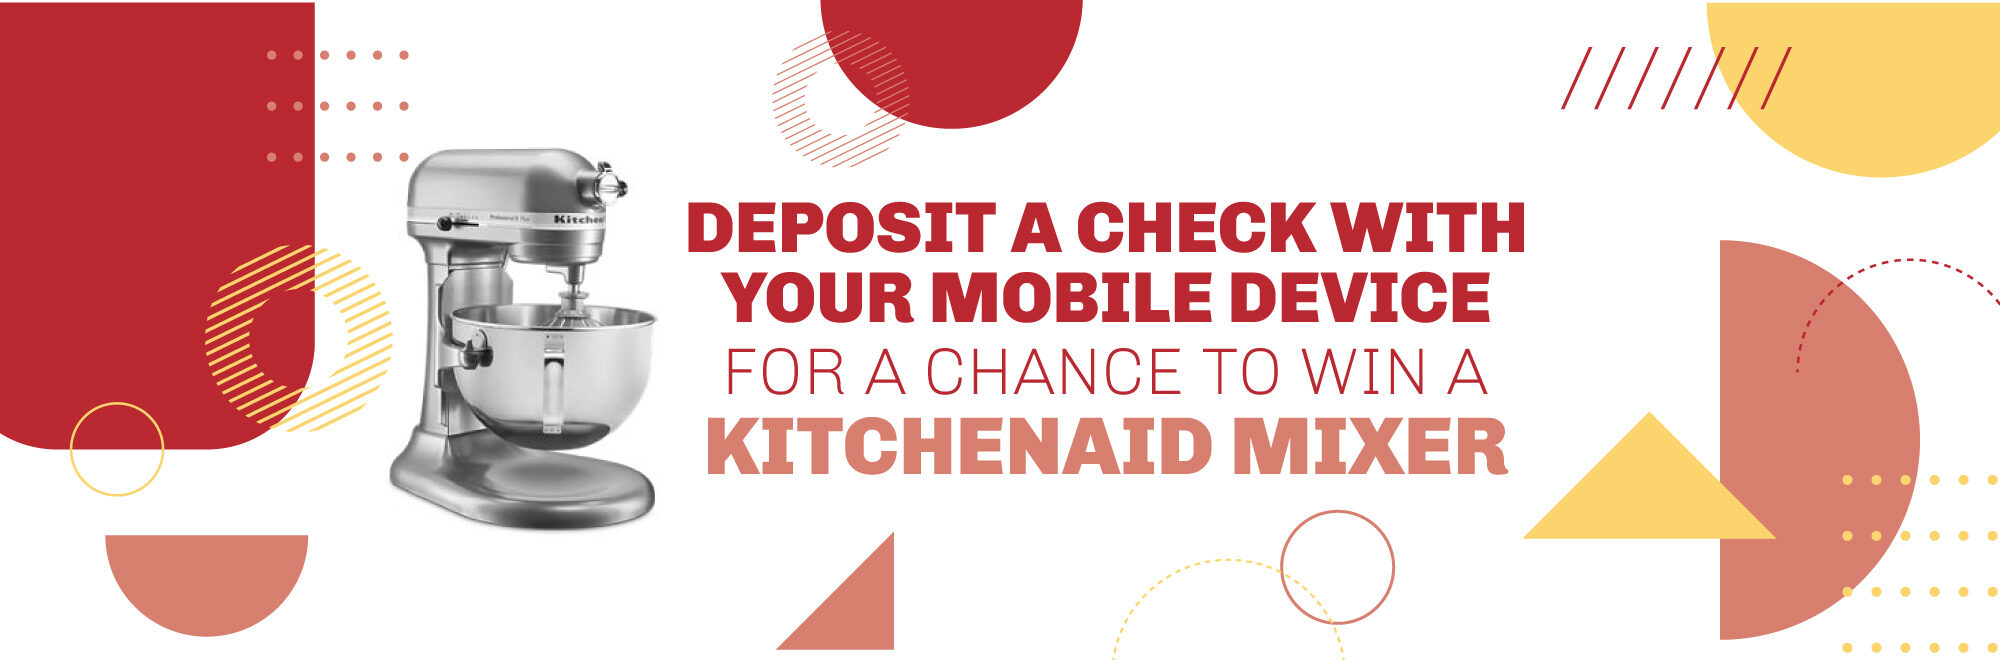 Deposit a check with your mobile device for a chance to win a Kitchenaid Mixer